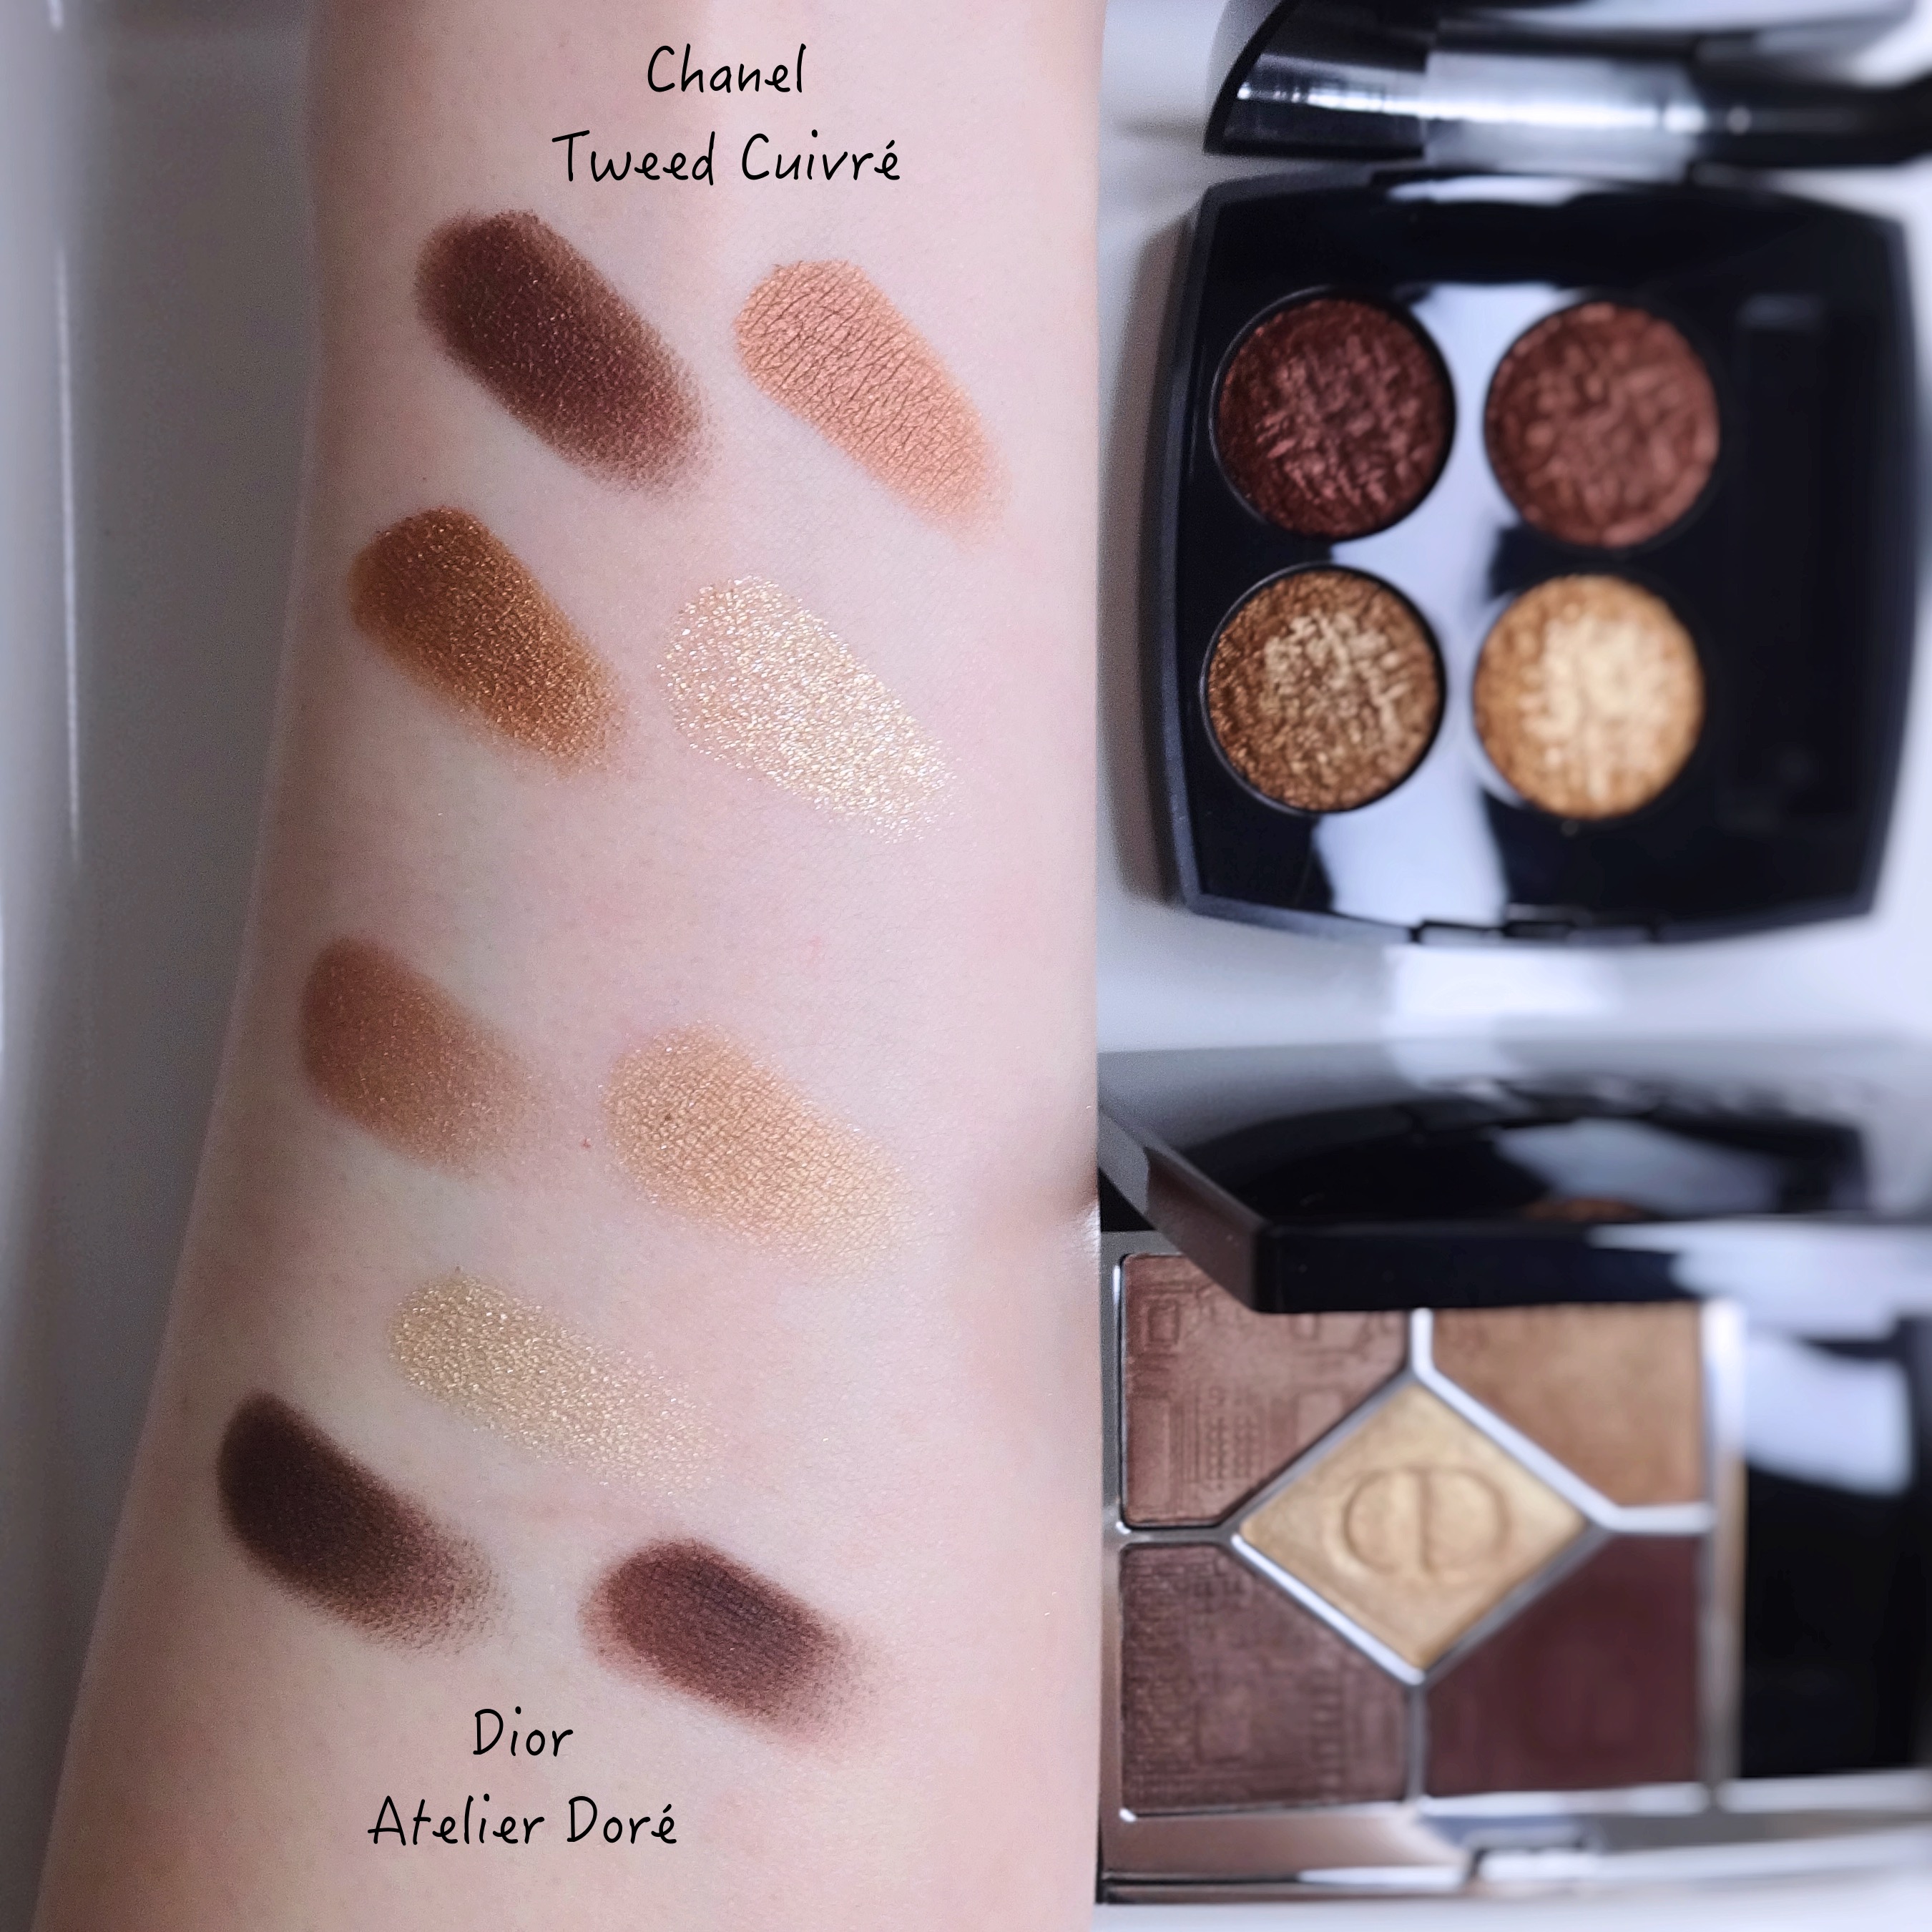 Chanel Tweed Cuivre comparison swatches